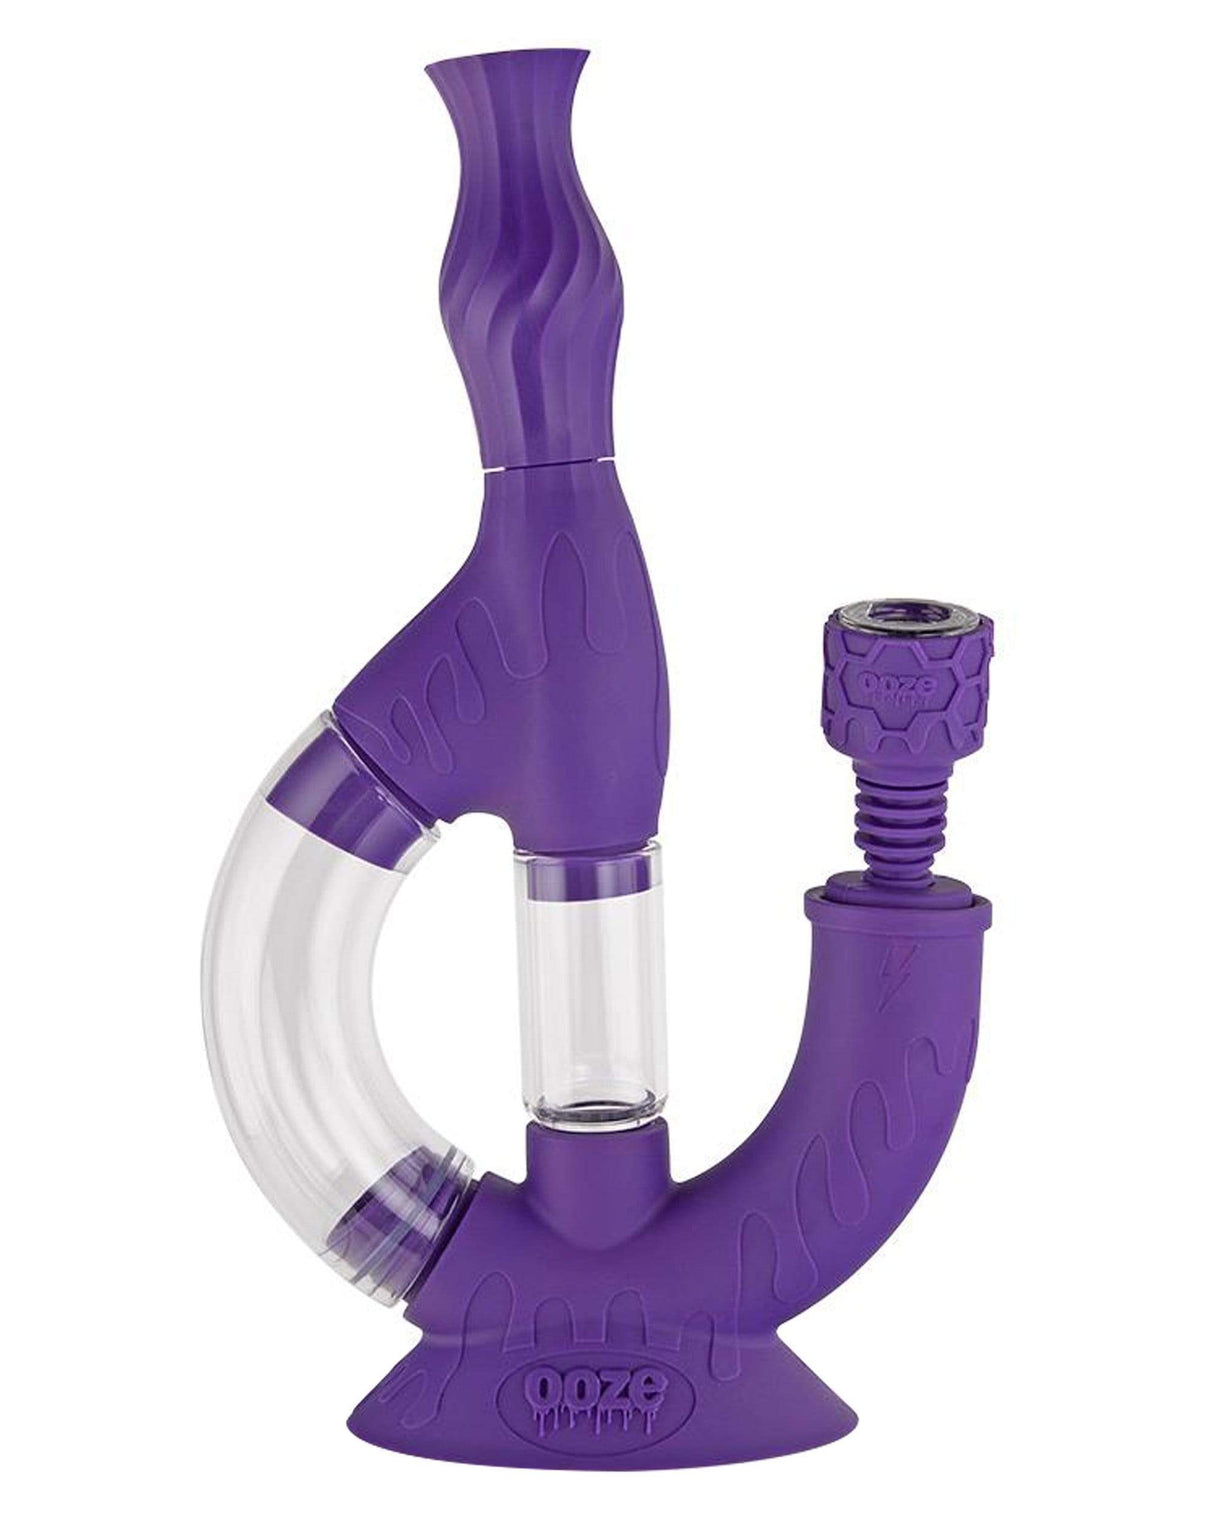 Ooze Echo 4-in-1 Silicone Bong in Purple with Clear Glass Middle Section, Front View